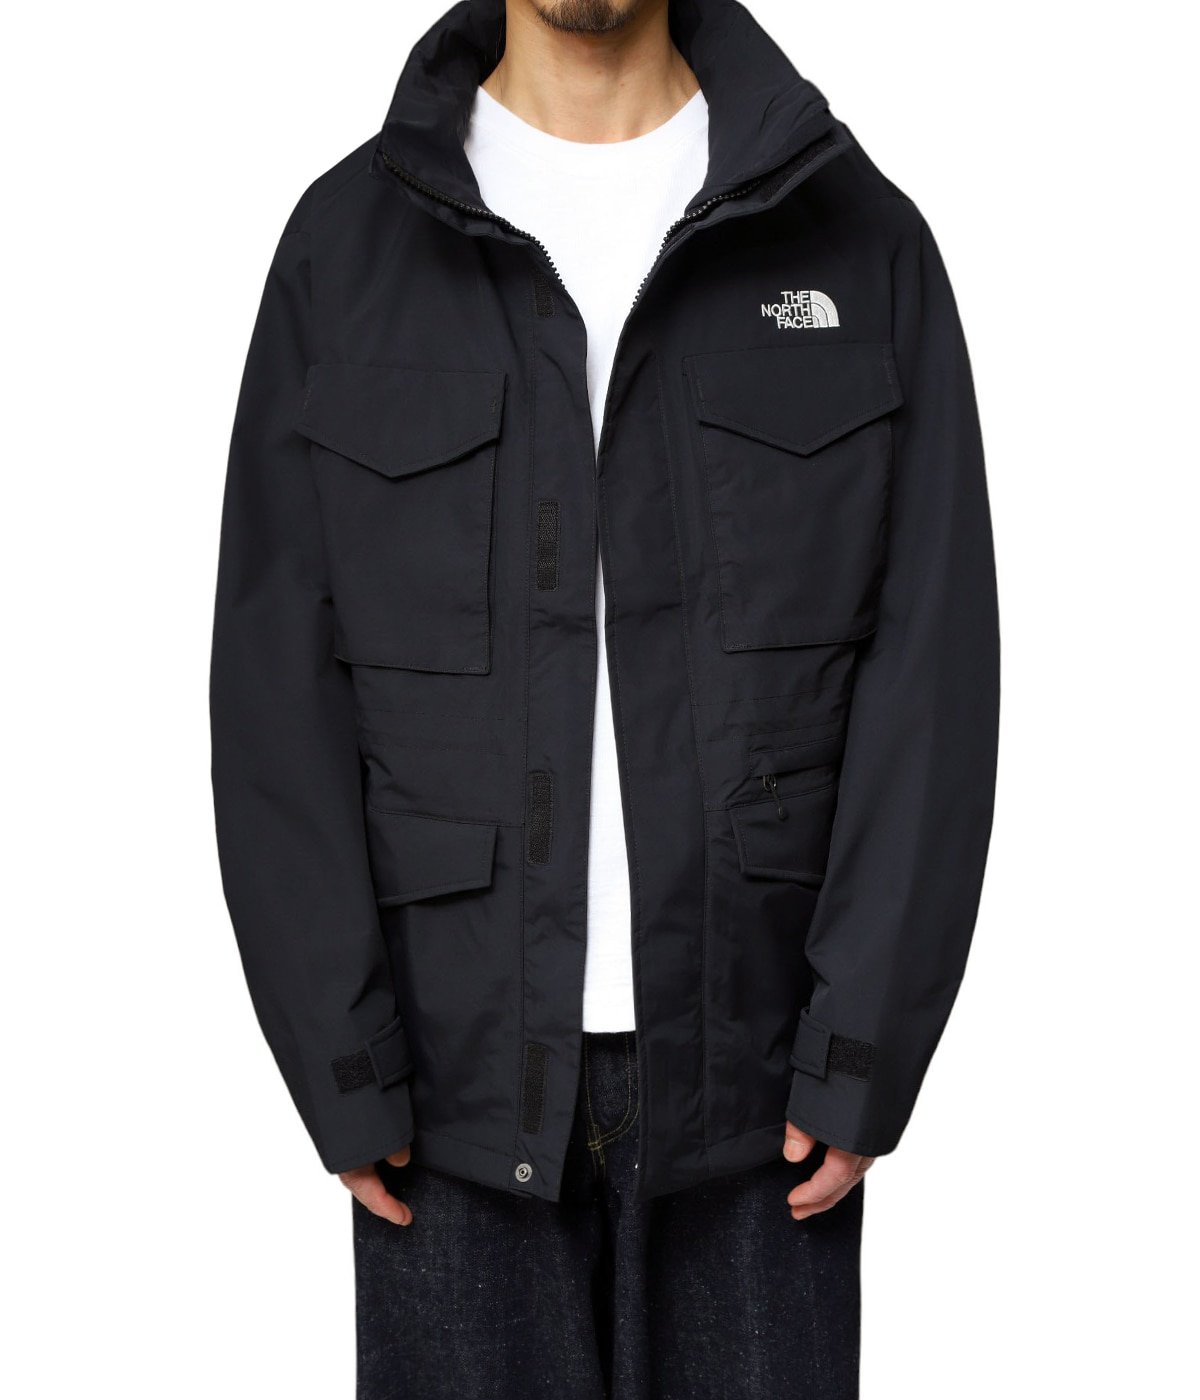 Panther Field Jacket | THE NORTH FACE(ザ ノースフェイス 